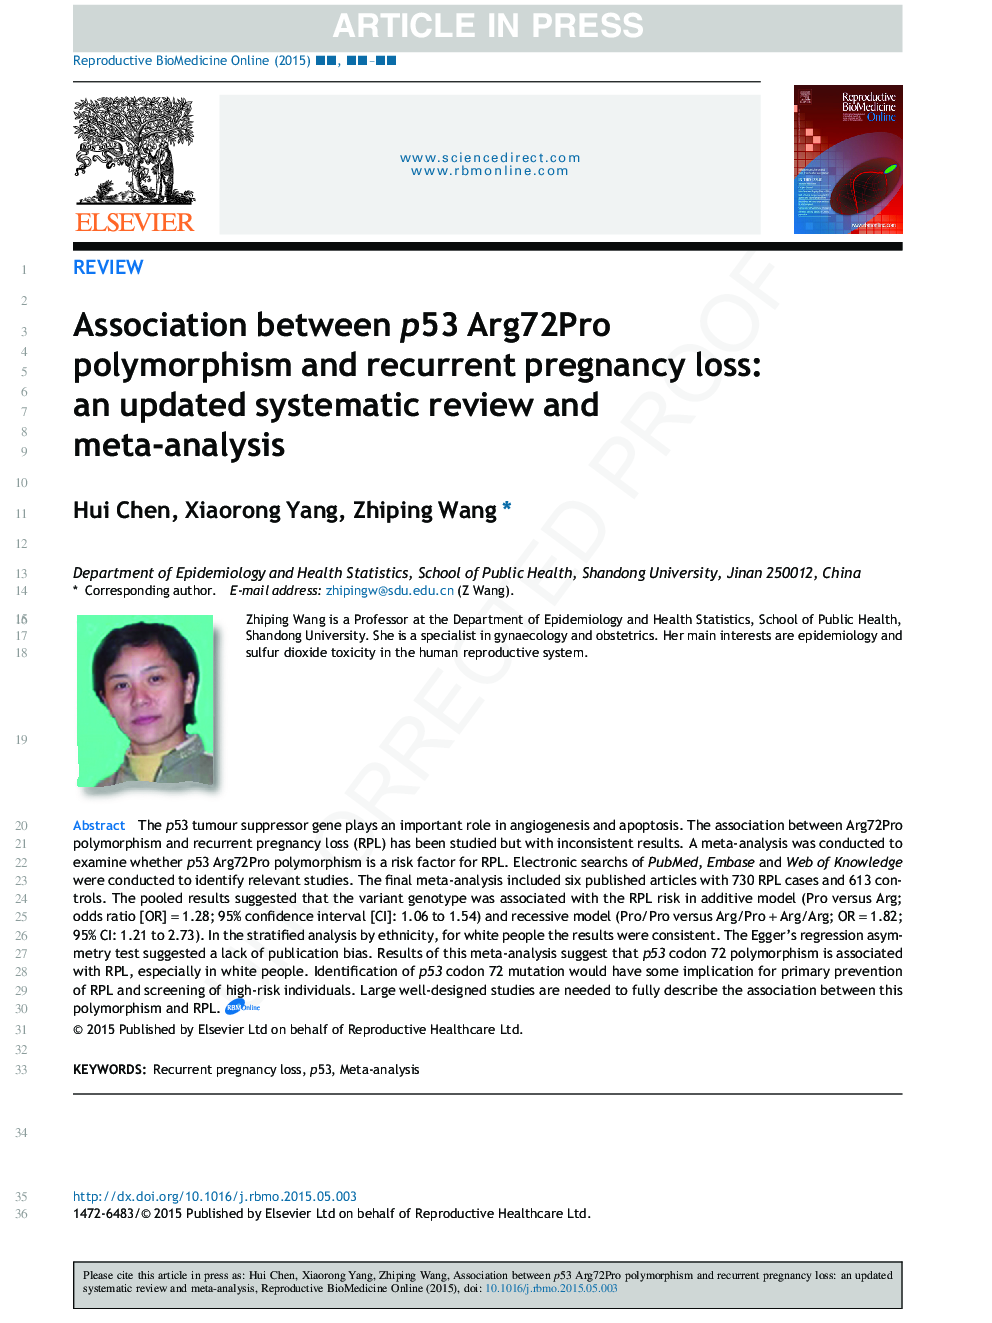 Association between p53 Arg72Pro polymorphism and recurrent pregnancy loss: an updated systematic review and meta-analysis